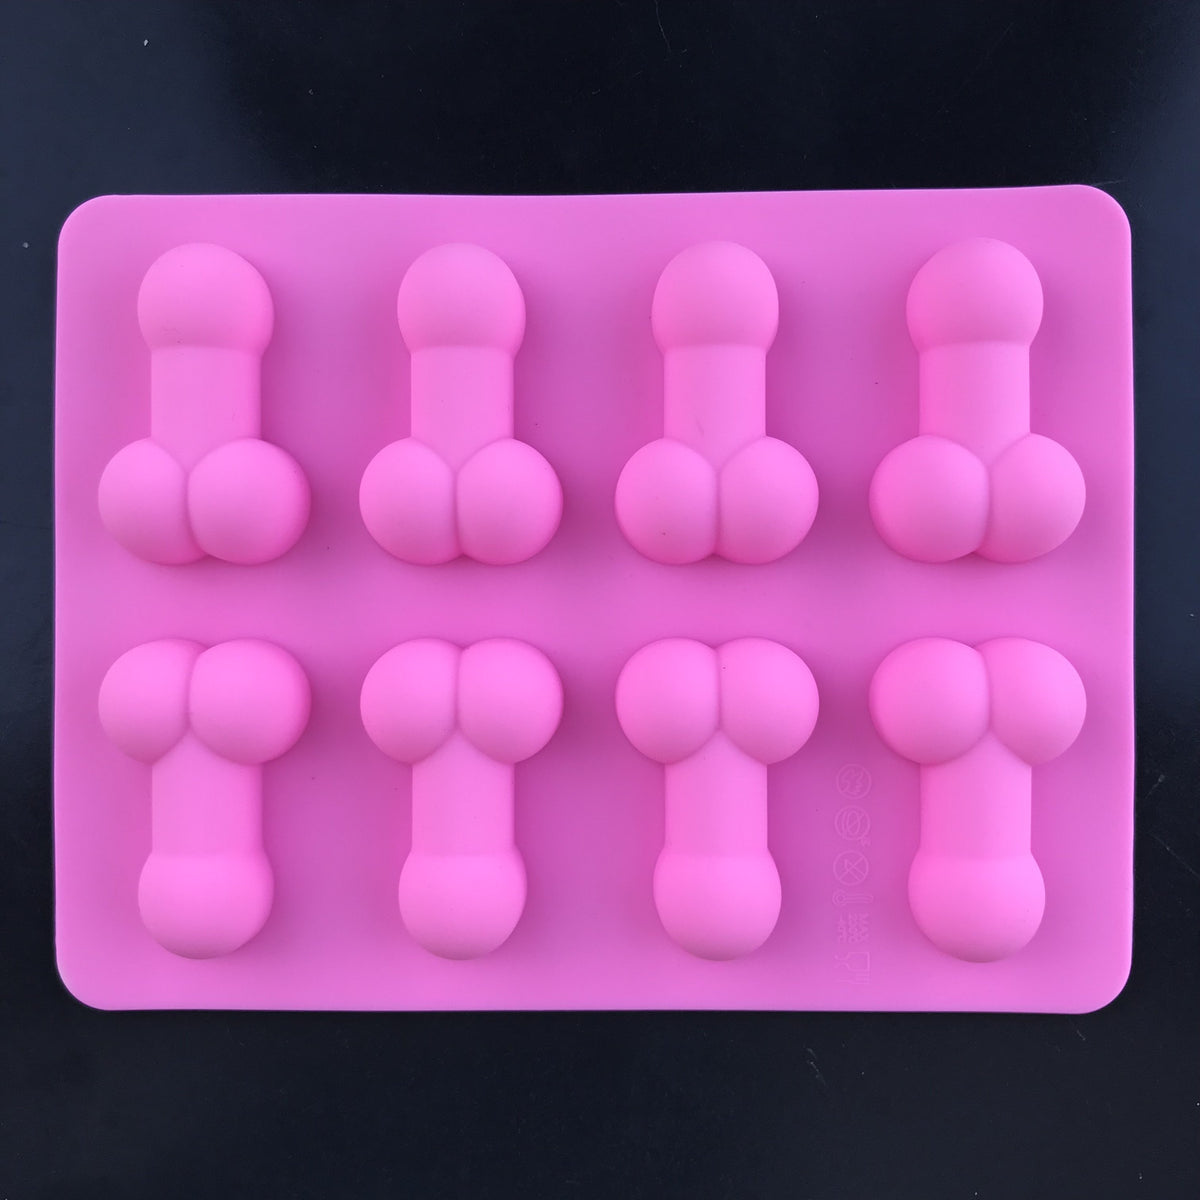  Silicone Penis Mold, Penis Soap Mold, Adult Theme Silicone  Mold, Penis Cake Mold, Hen Party Mold, Bachlorette Party Mold (Small)